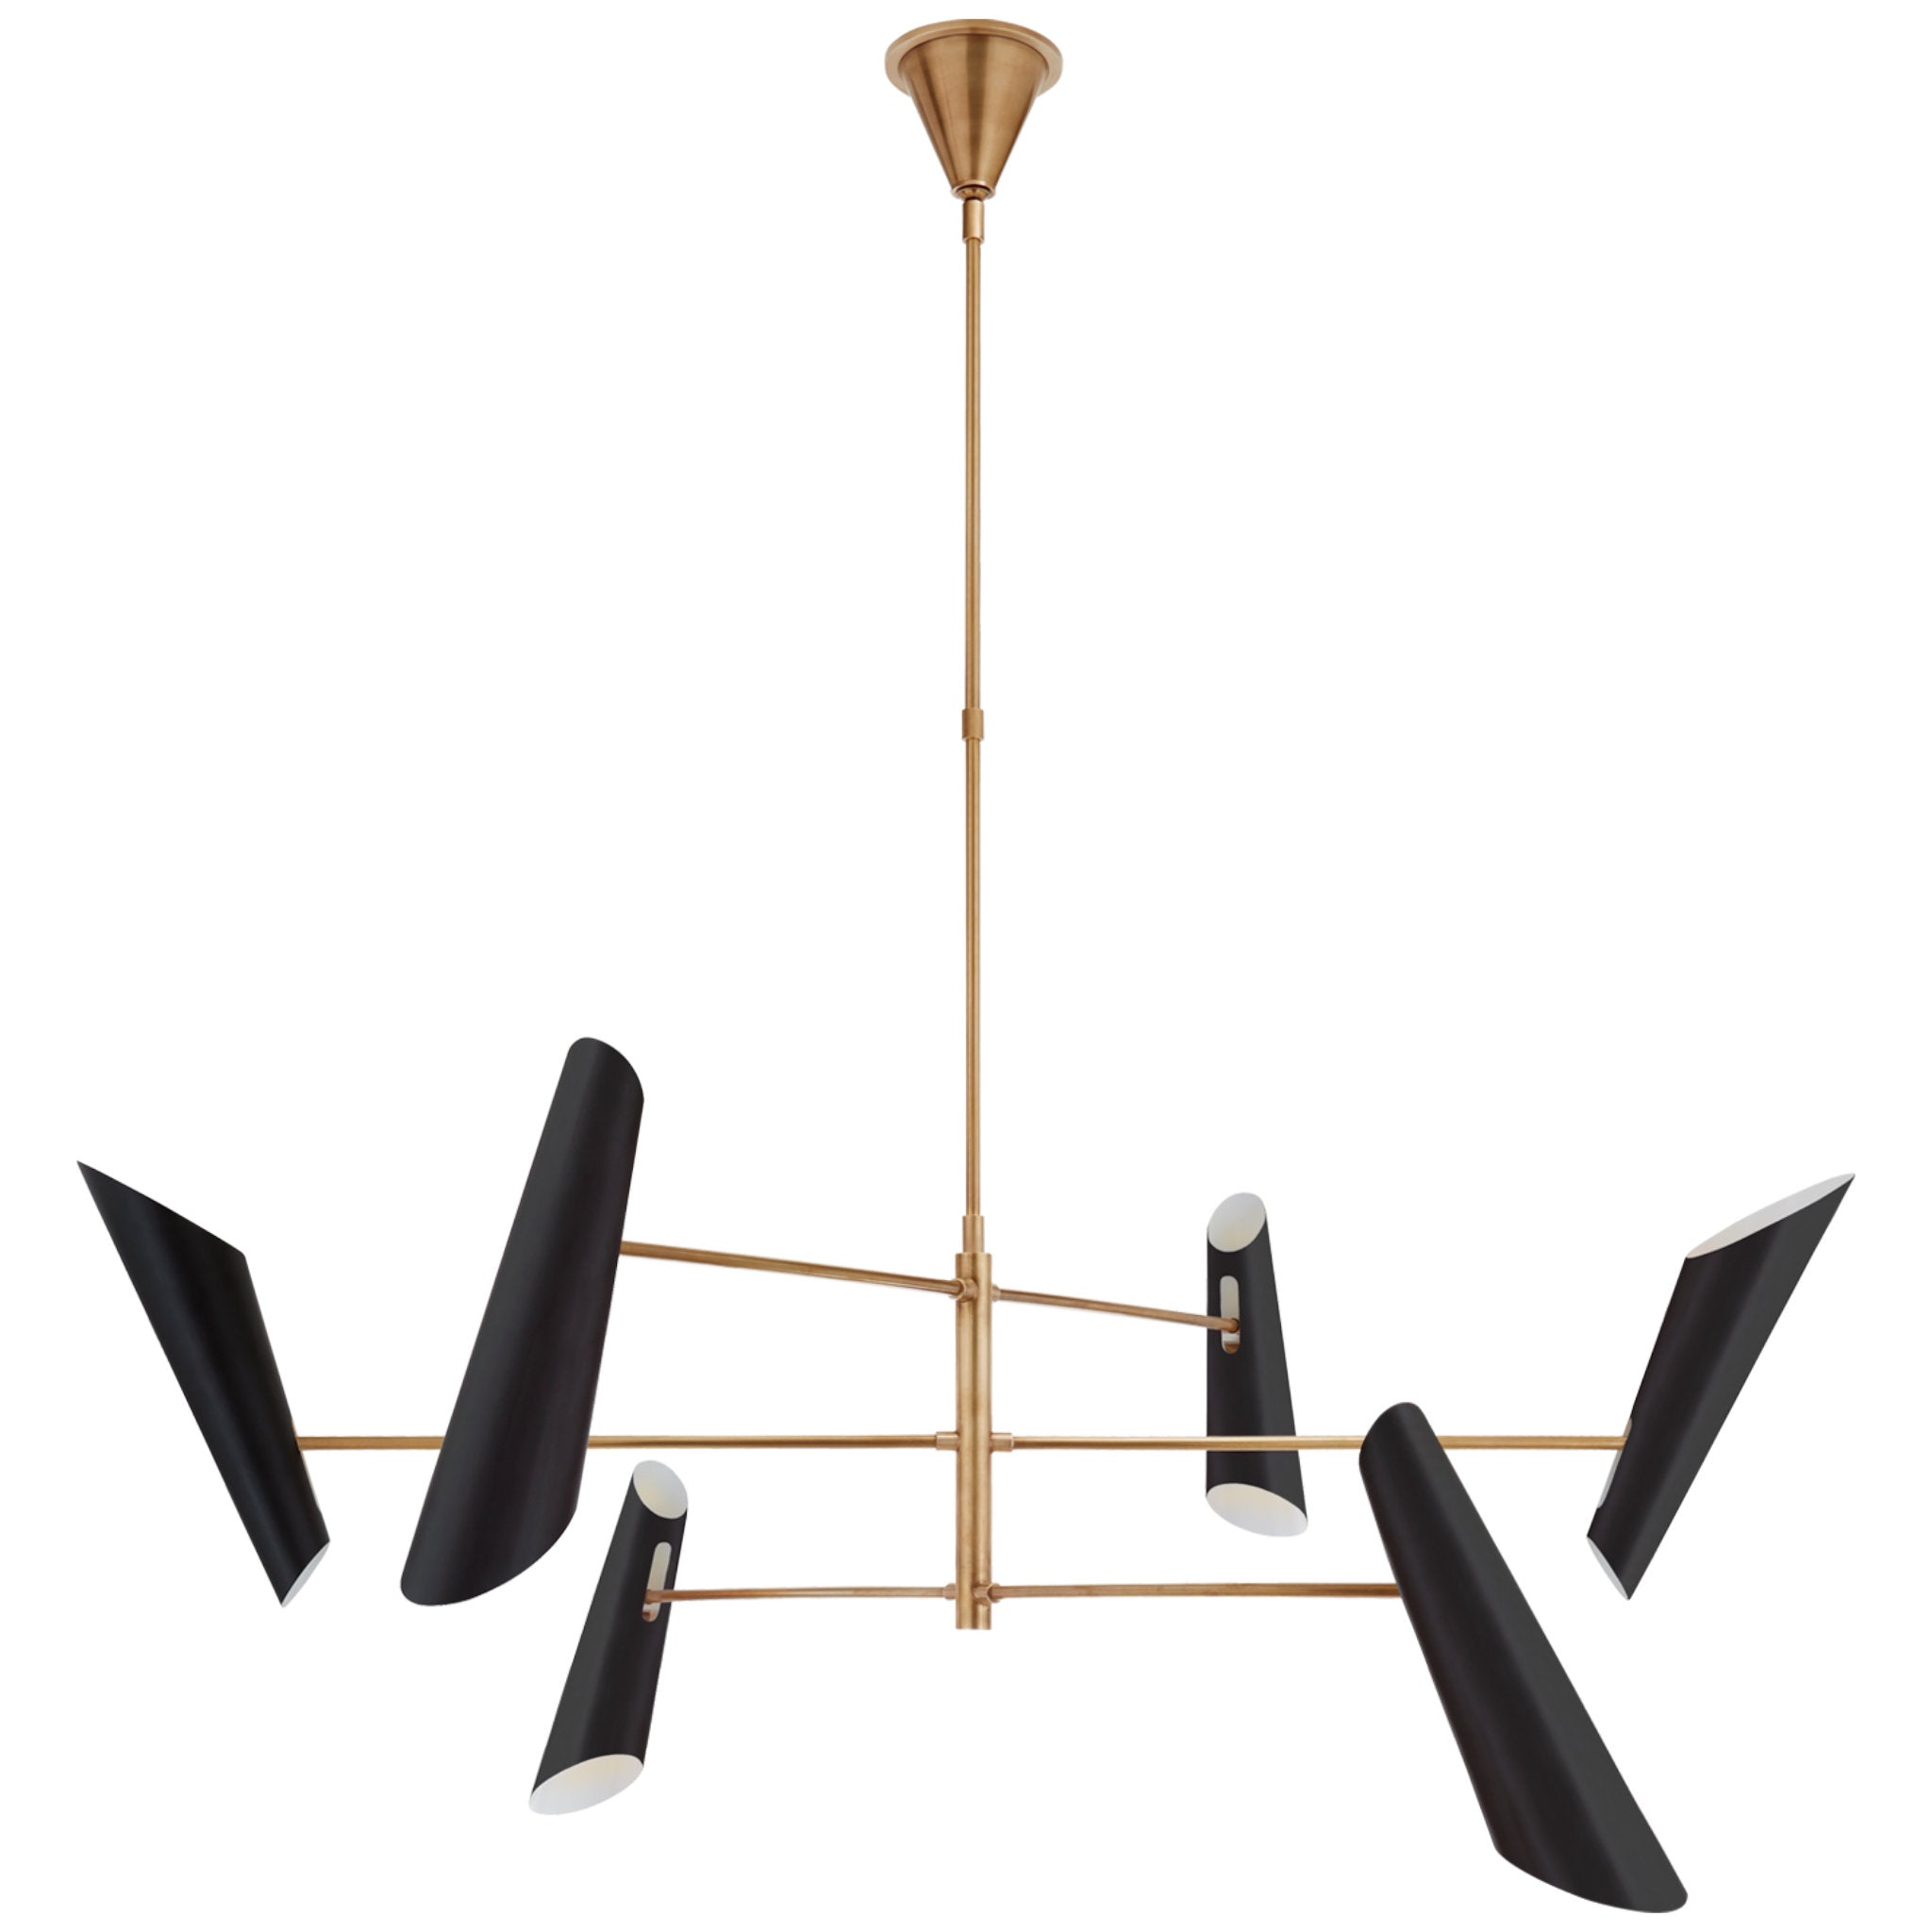 AERIN Franca Large Pivoting Chandelier in Hand-Rubbed Antique Brass with Black Shades